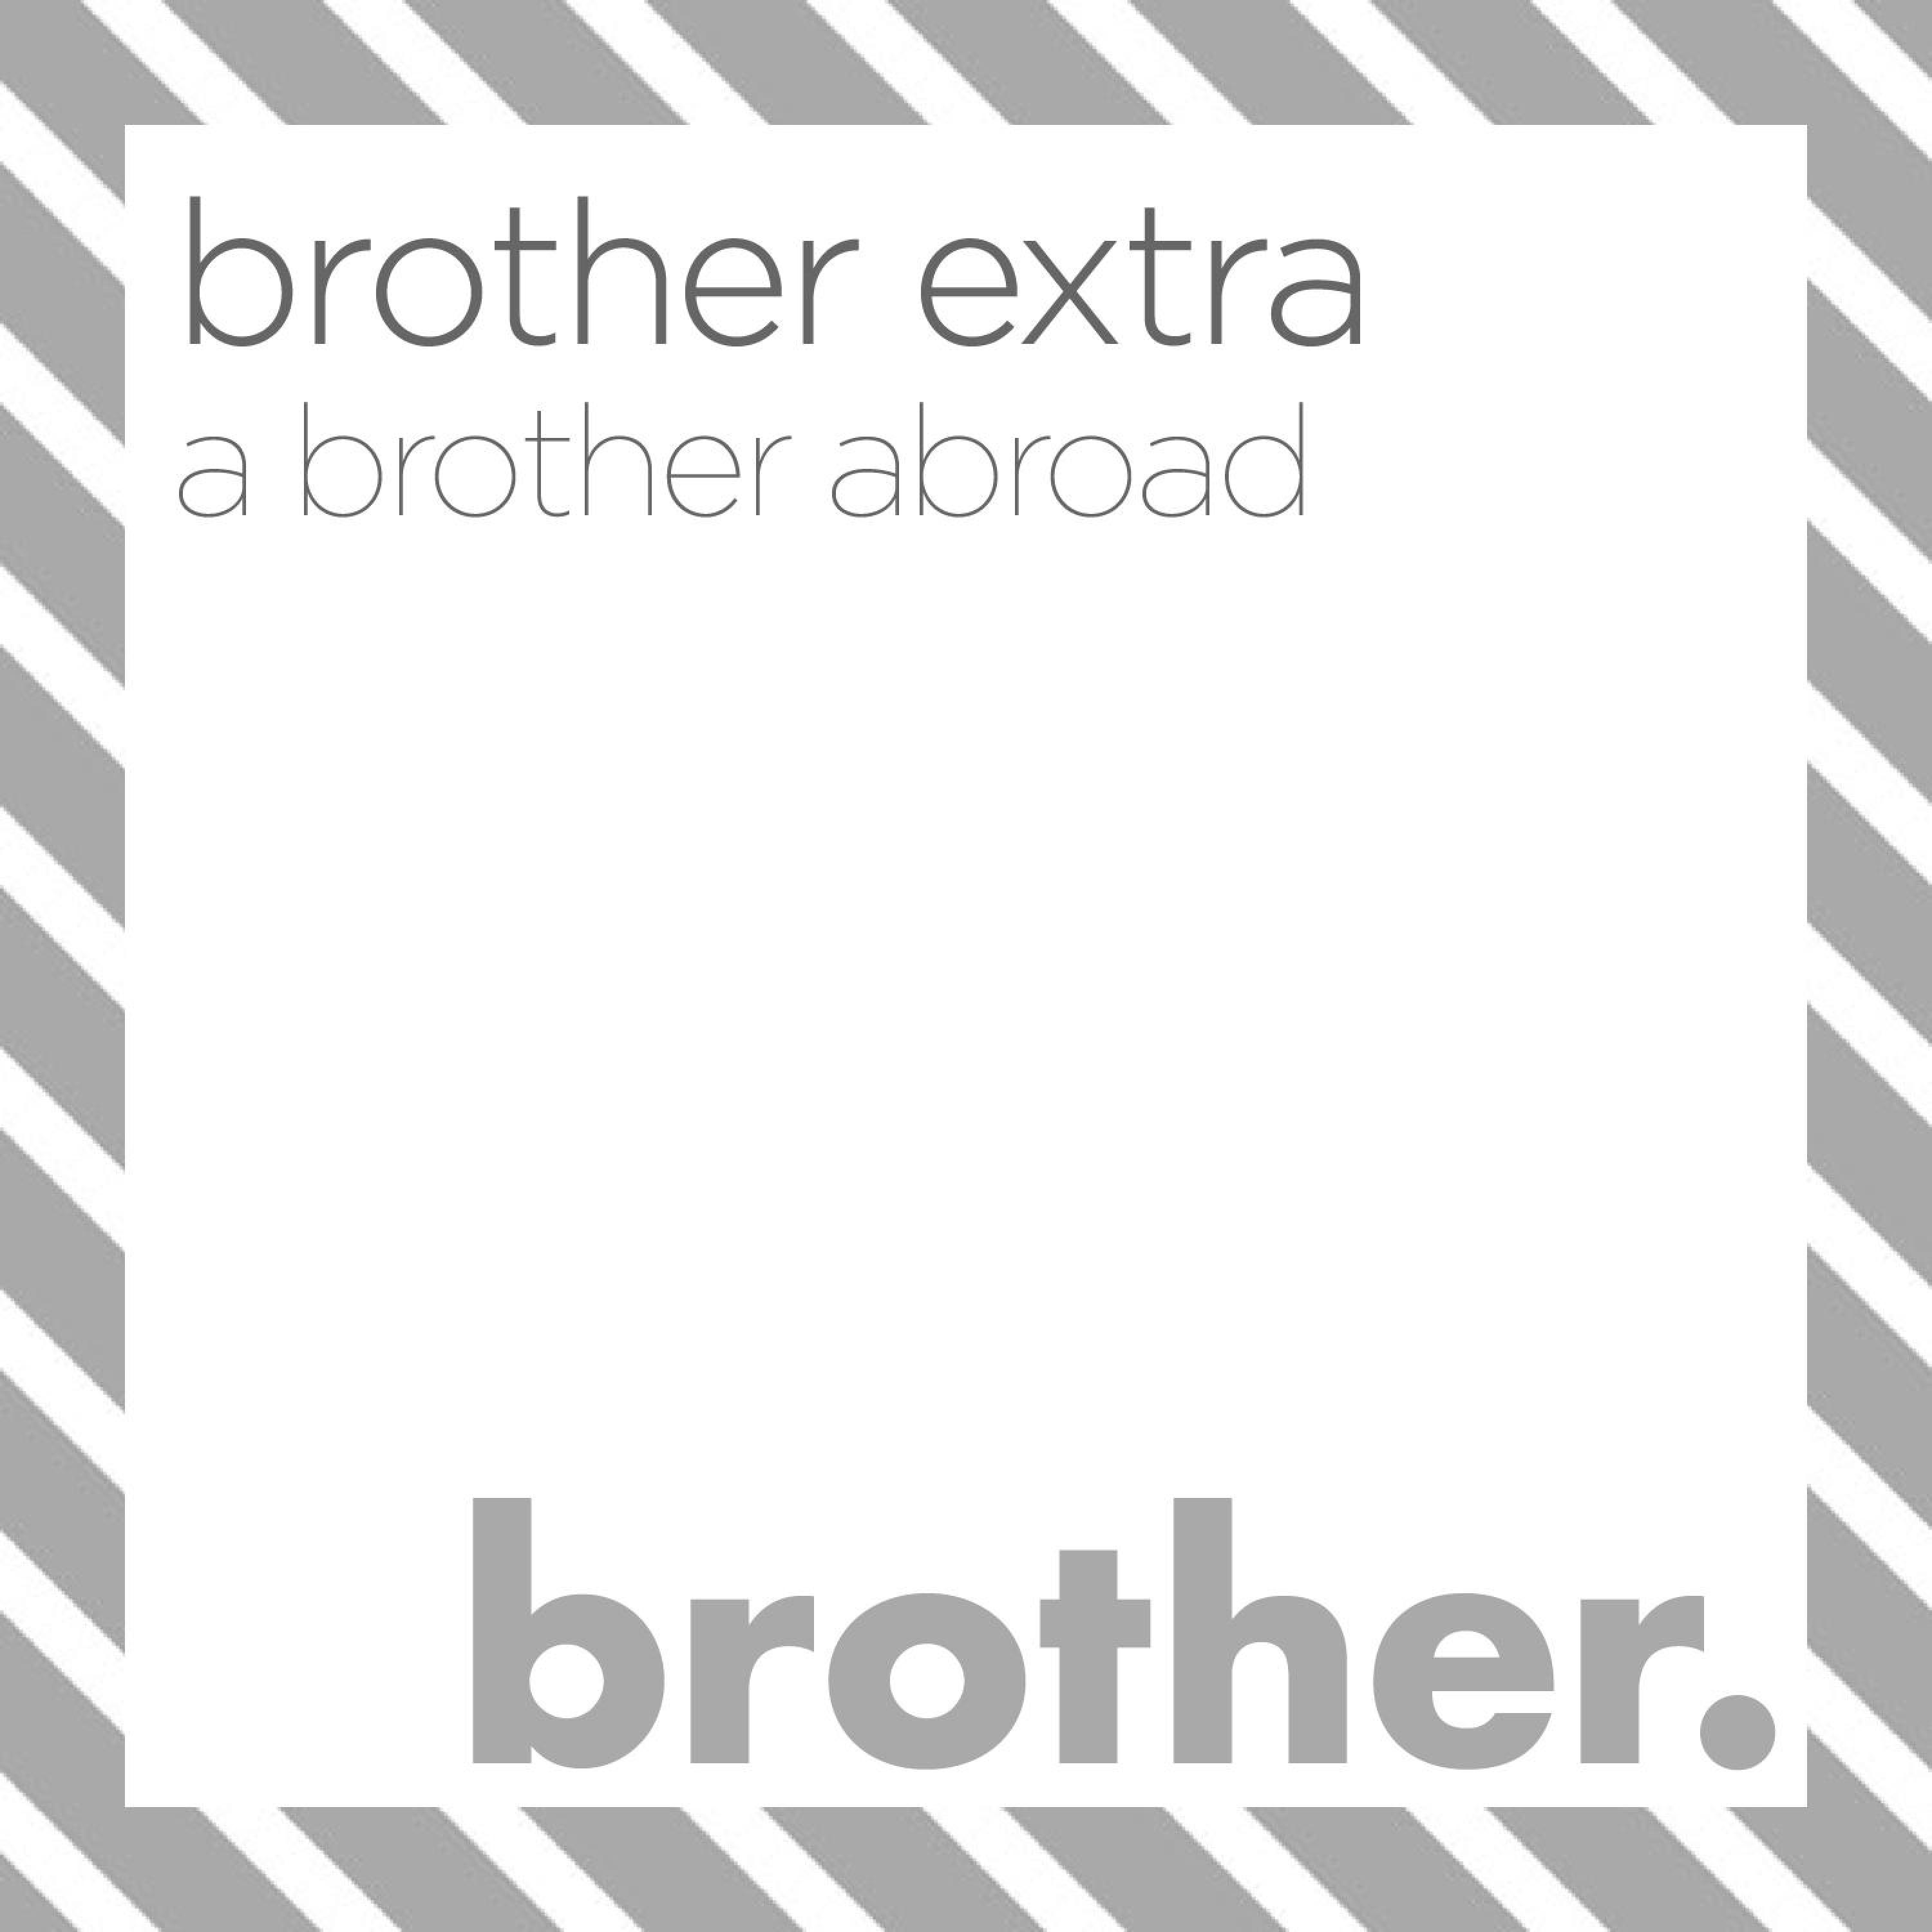 Brother Extra: A Brother Abroad